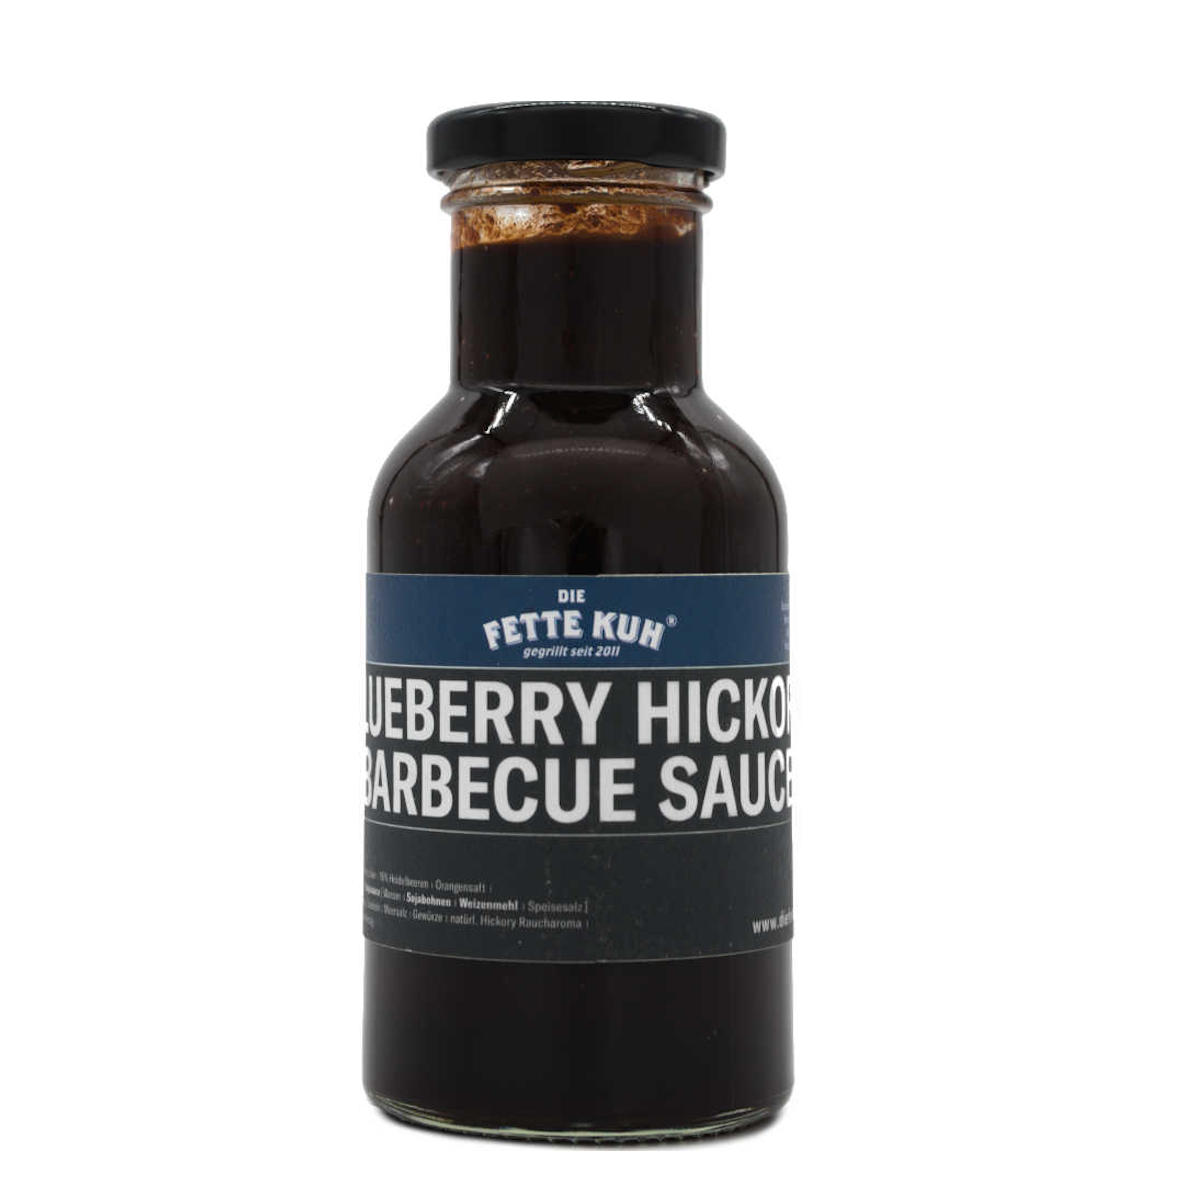 Die fette Kuh Blueberry Hickory Barbecue Sauce, 250 ml